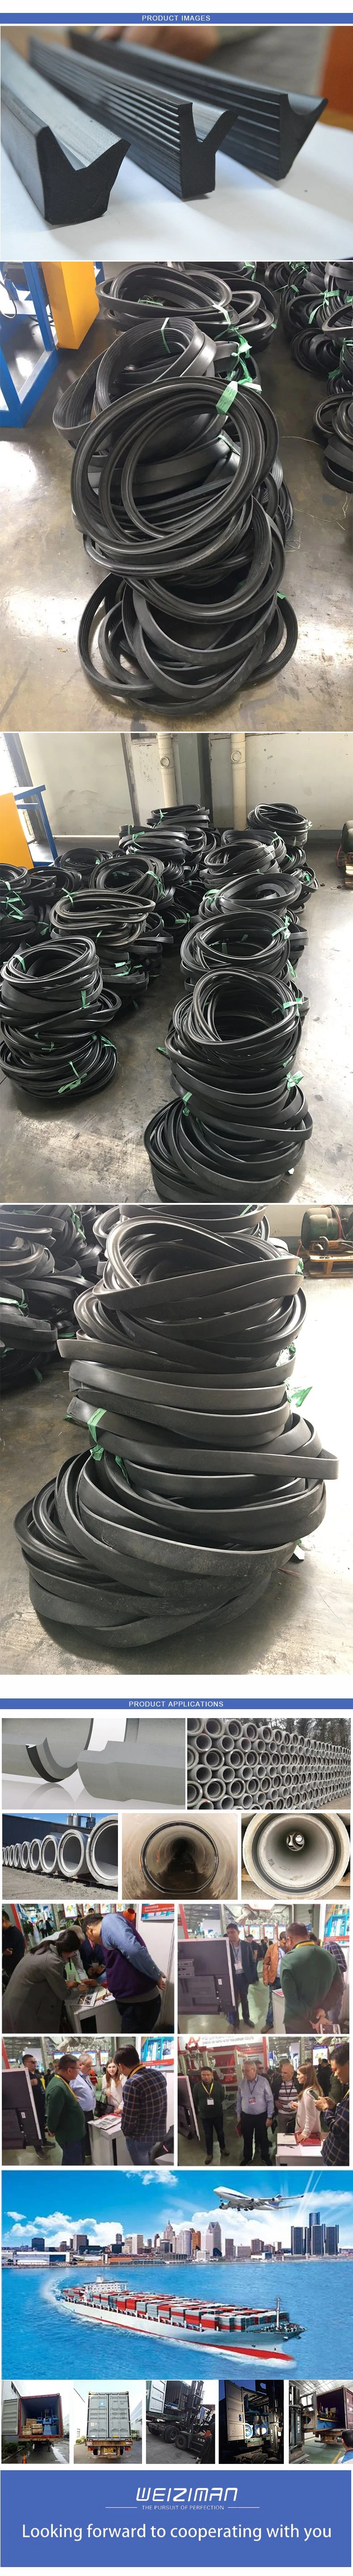 High Temperature Fire & Thermal Resistance EPDM Rubber Seals Gasket